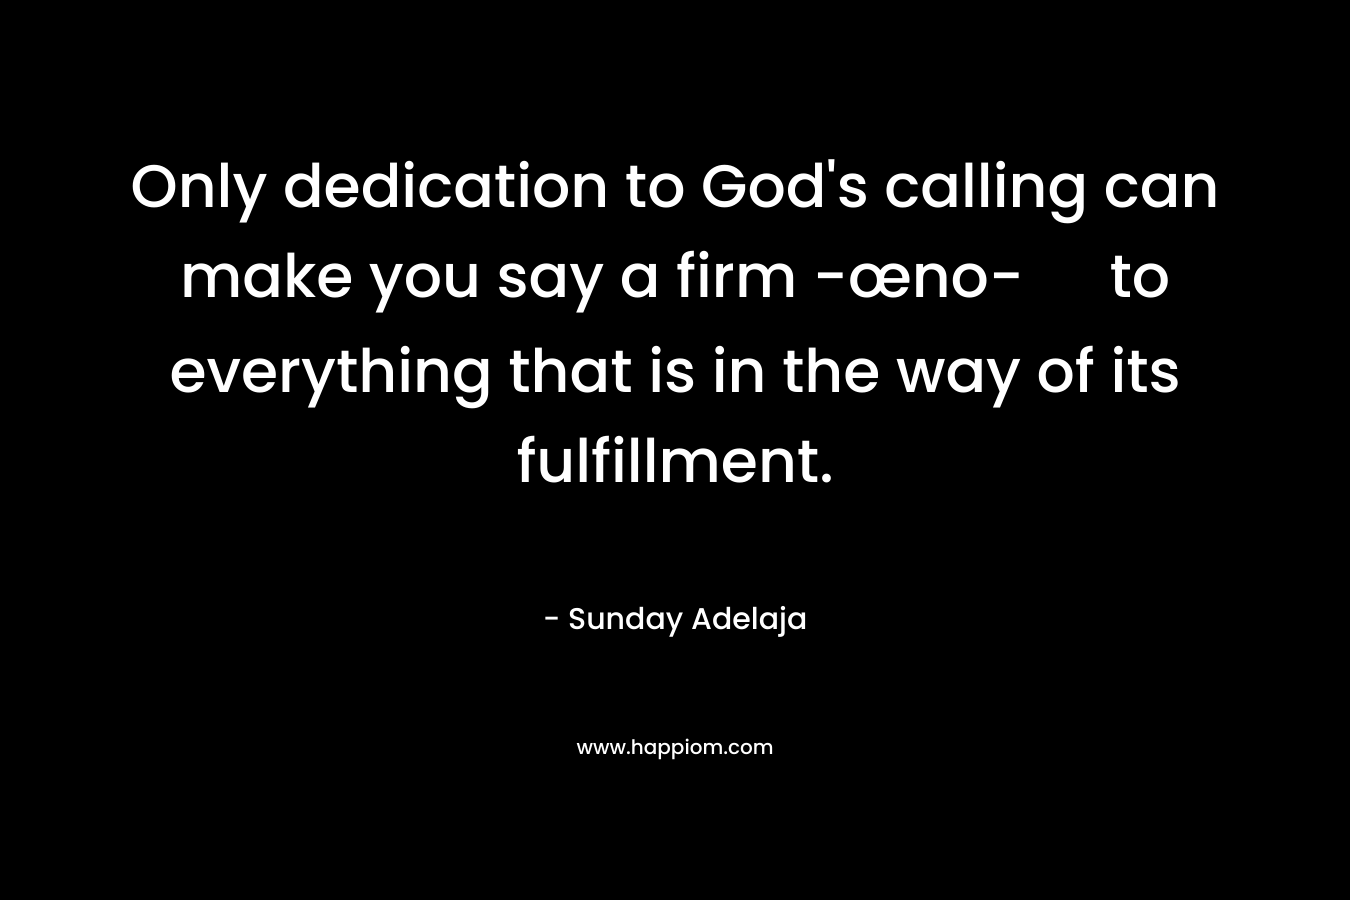 Only dedication to God’s calling can make you say a firm -œno- to everything that is in the way of its fulfillment. – Sunday Adelaja